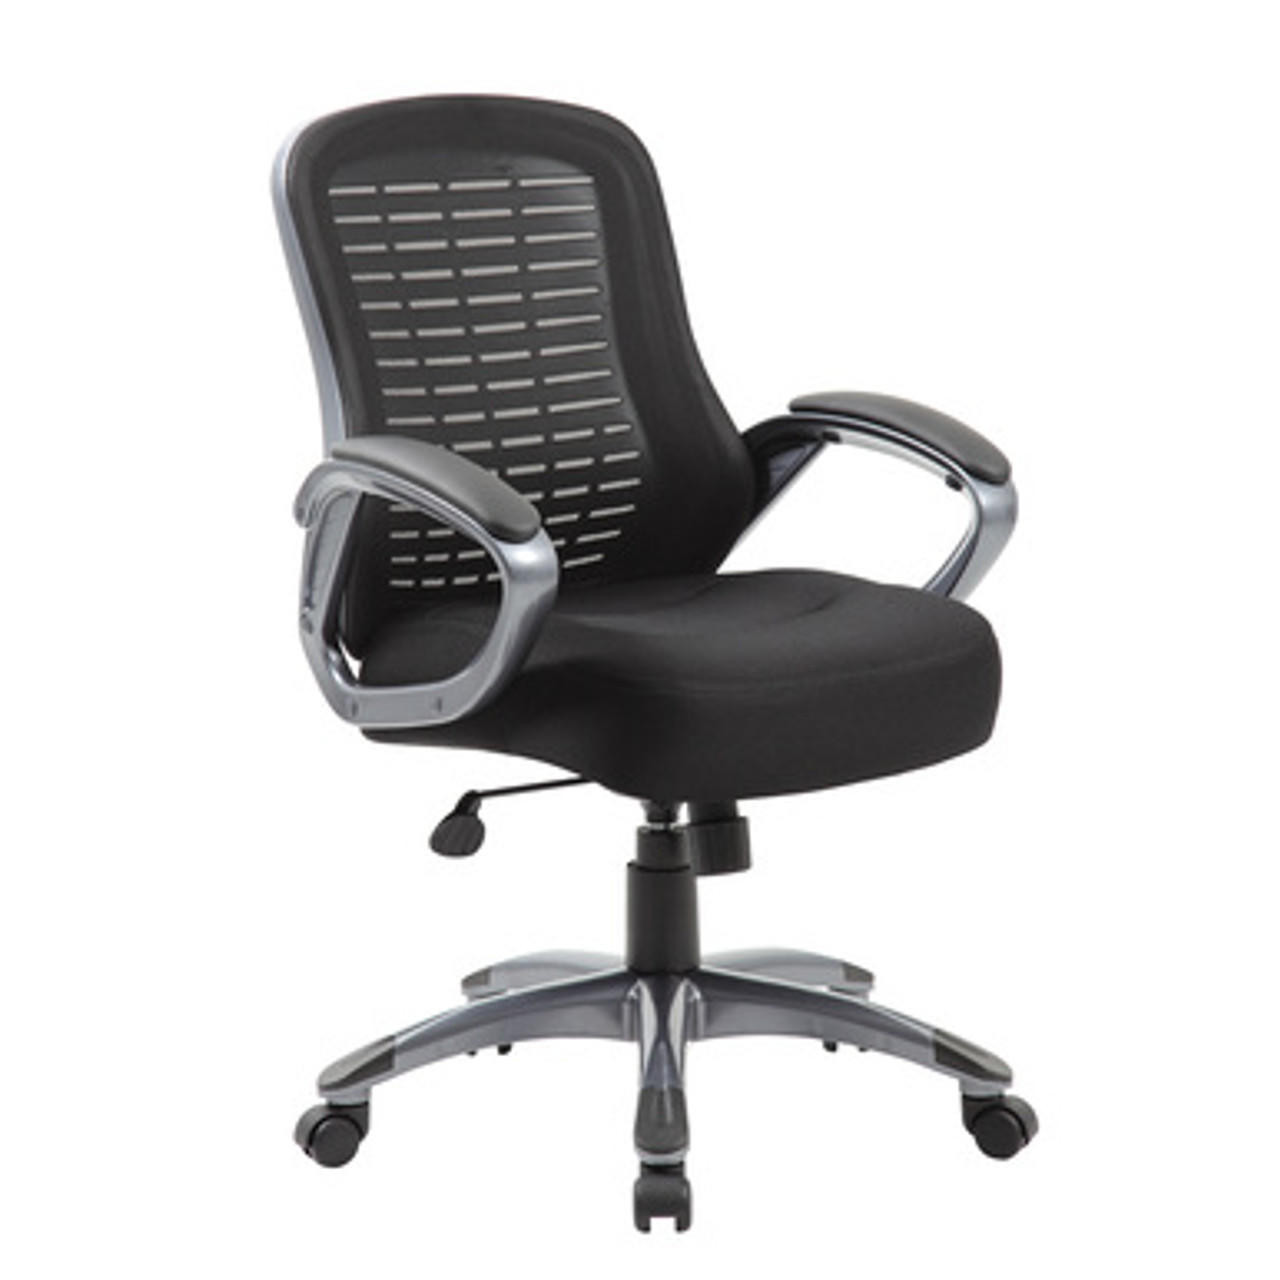 https://cdn11.bigcommerce.com/s-i16nt17fuj/images/stencil/1280x1280/products/10191/41707/office-source-lattice-mesh-chair-with-thick-padded-seat-05ac2qhmf__00742.1702828910.jpg?c=2